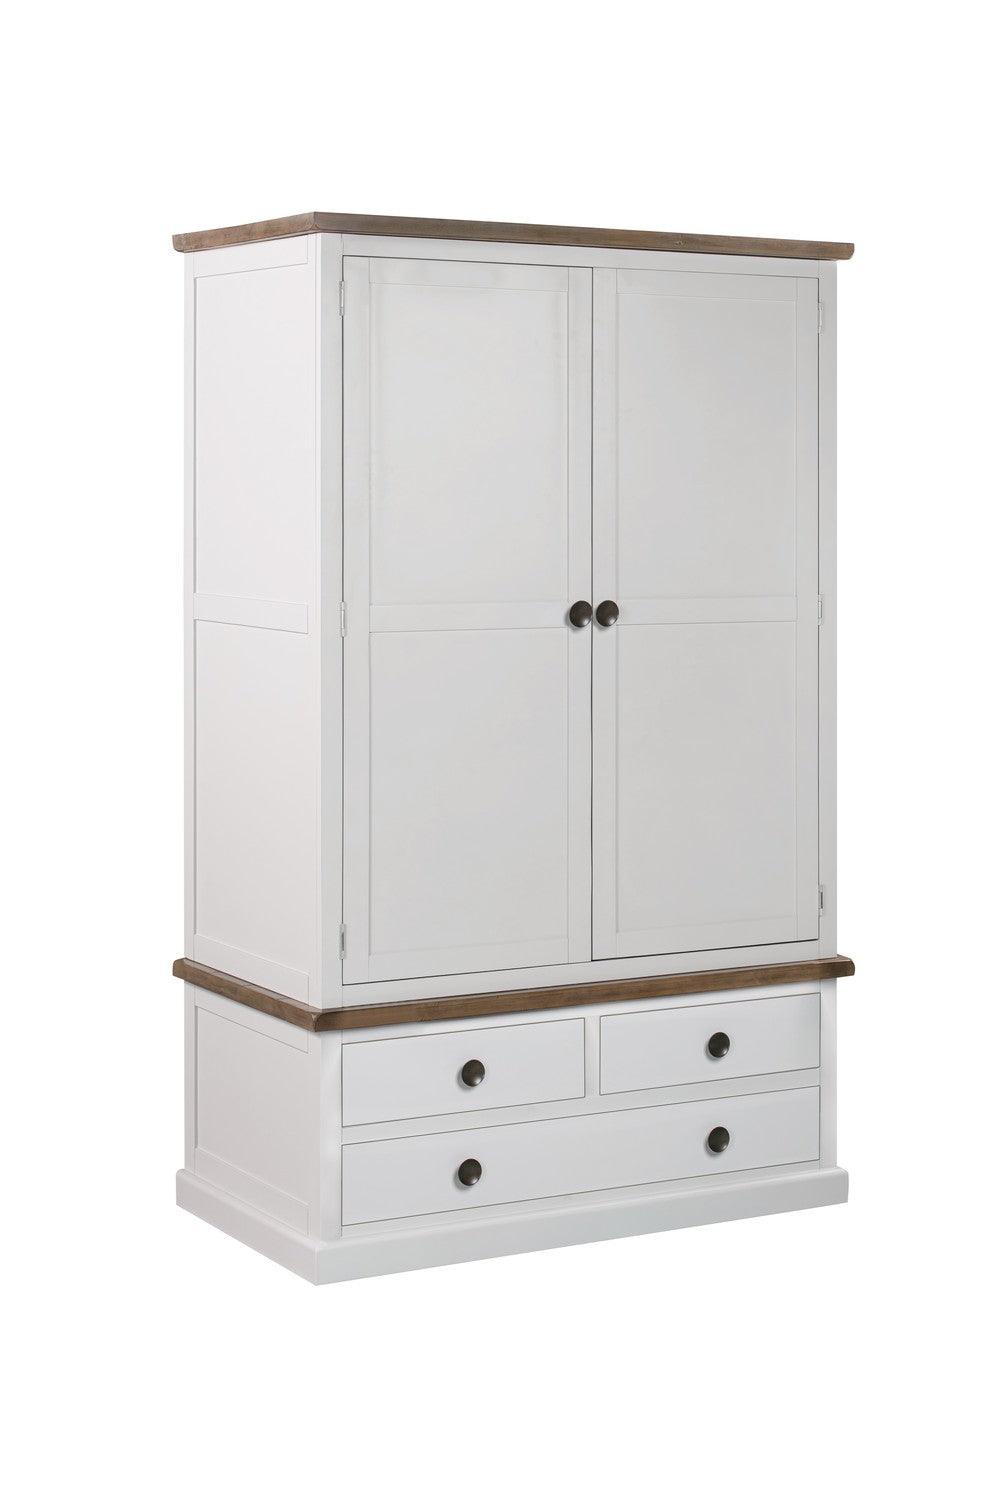 The Hampton CollectionThree Drawer Two Door Wardrobe - Vookoo Lifestyle